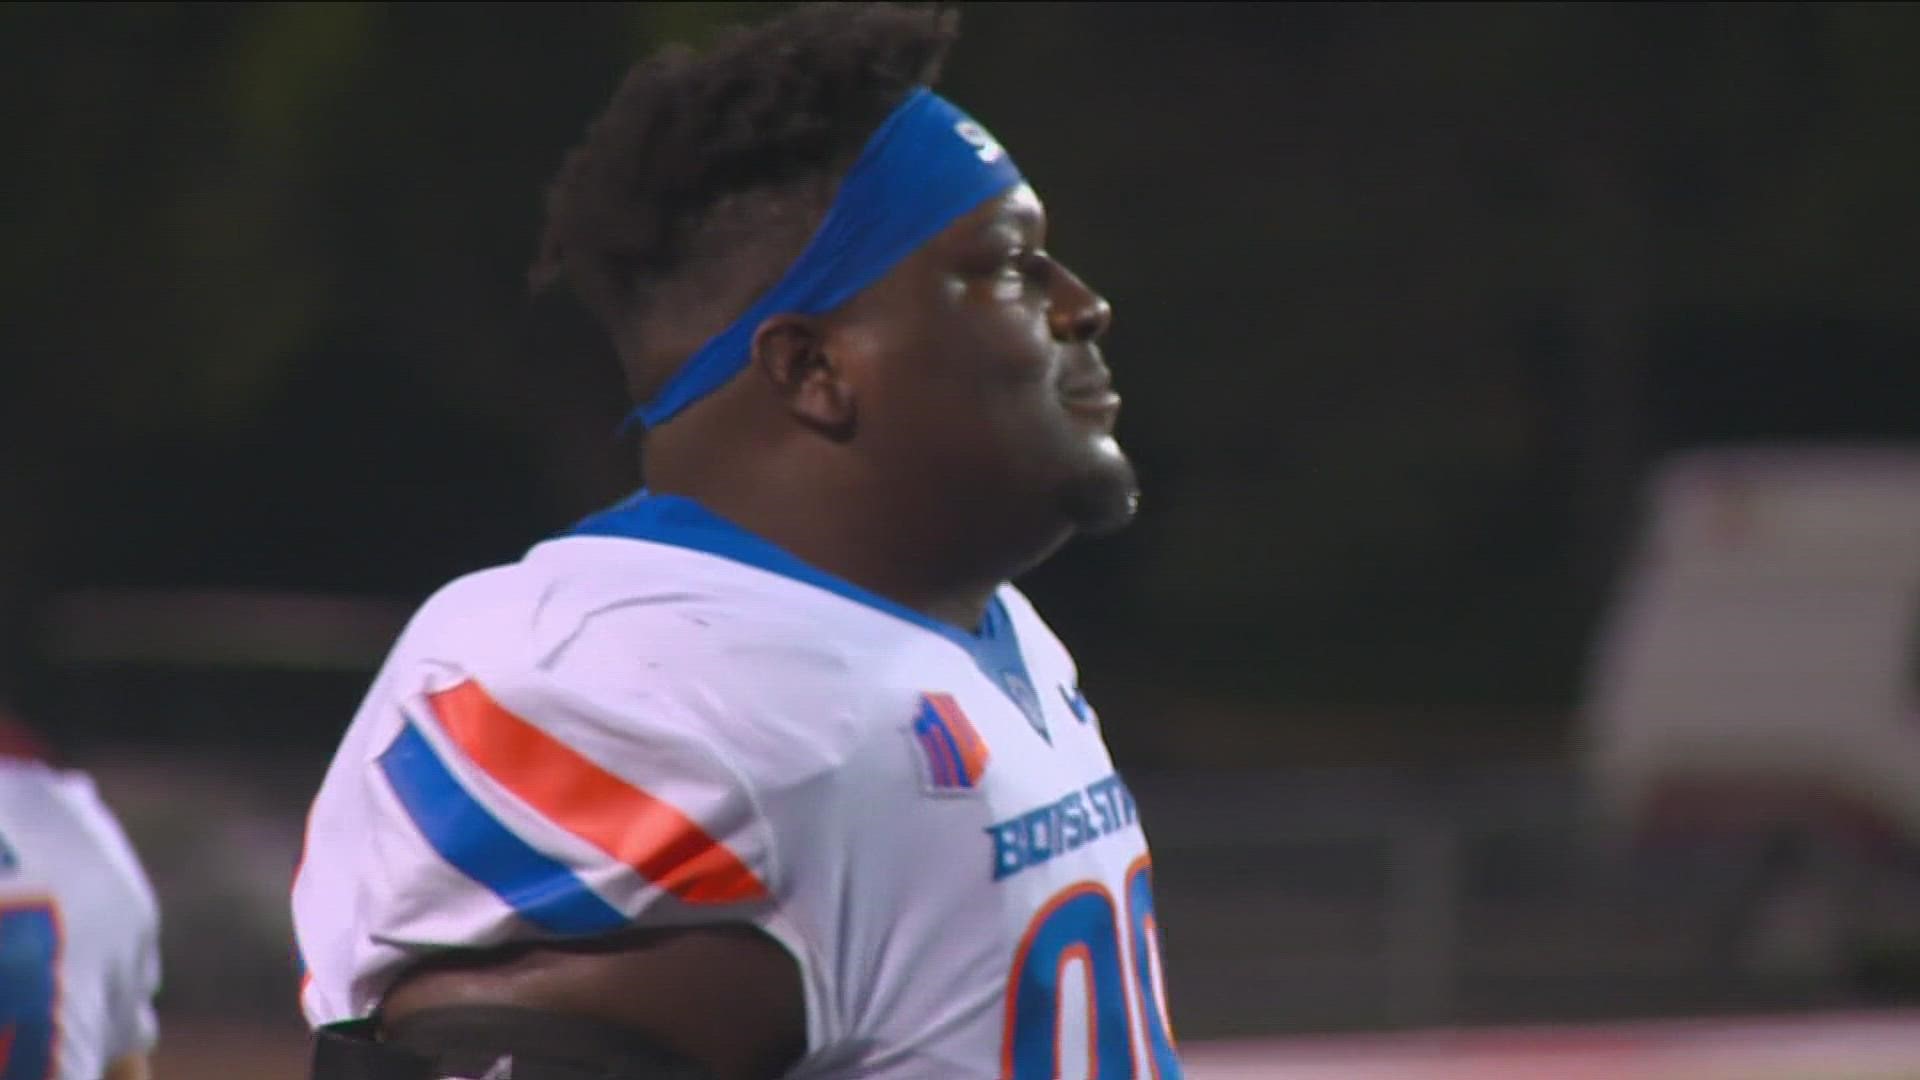 As a high school sophomore in Texas, Gums played running back. Now, the nose tackle is earning time in short-yardage situations on Boise State's offense.